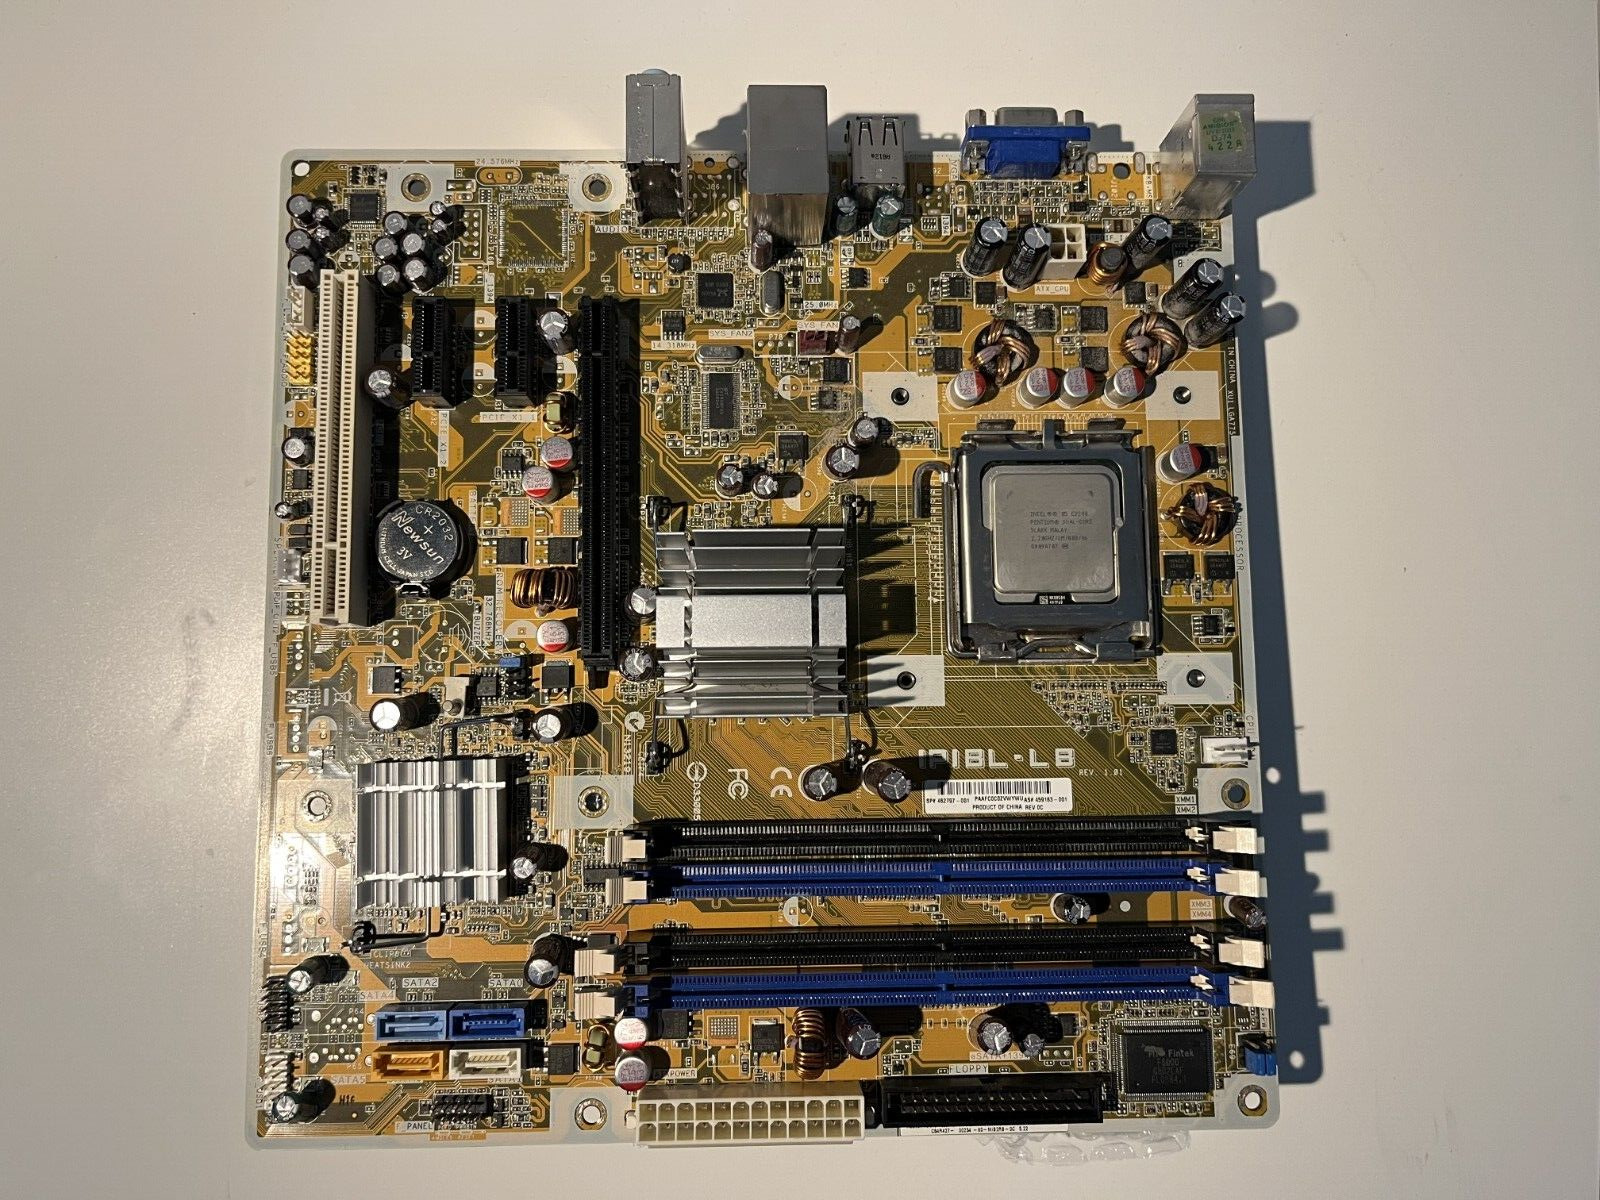 ASUS IPIBL-LB HP 5189-1080 Motherboard w/Intel 2.2GHz CPU - Tested & Working